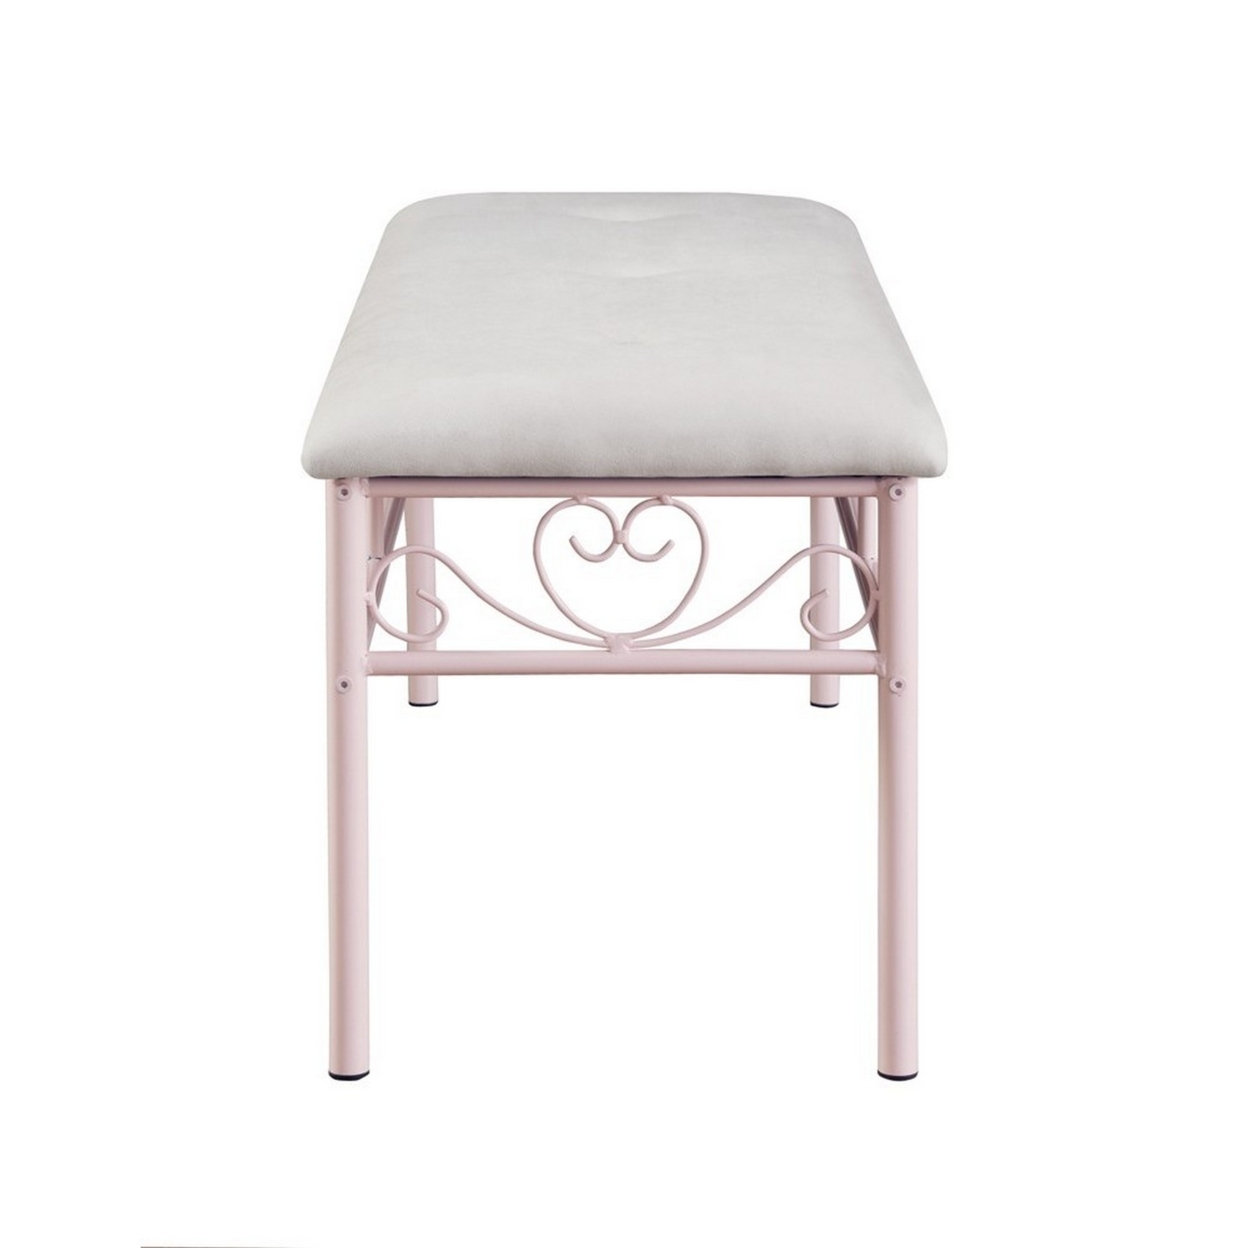 Metal Bench With Padded Seating And Scrolled Accents, Pink And Gray- Saltoro Sherpi